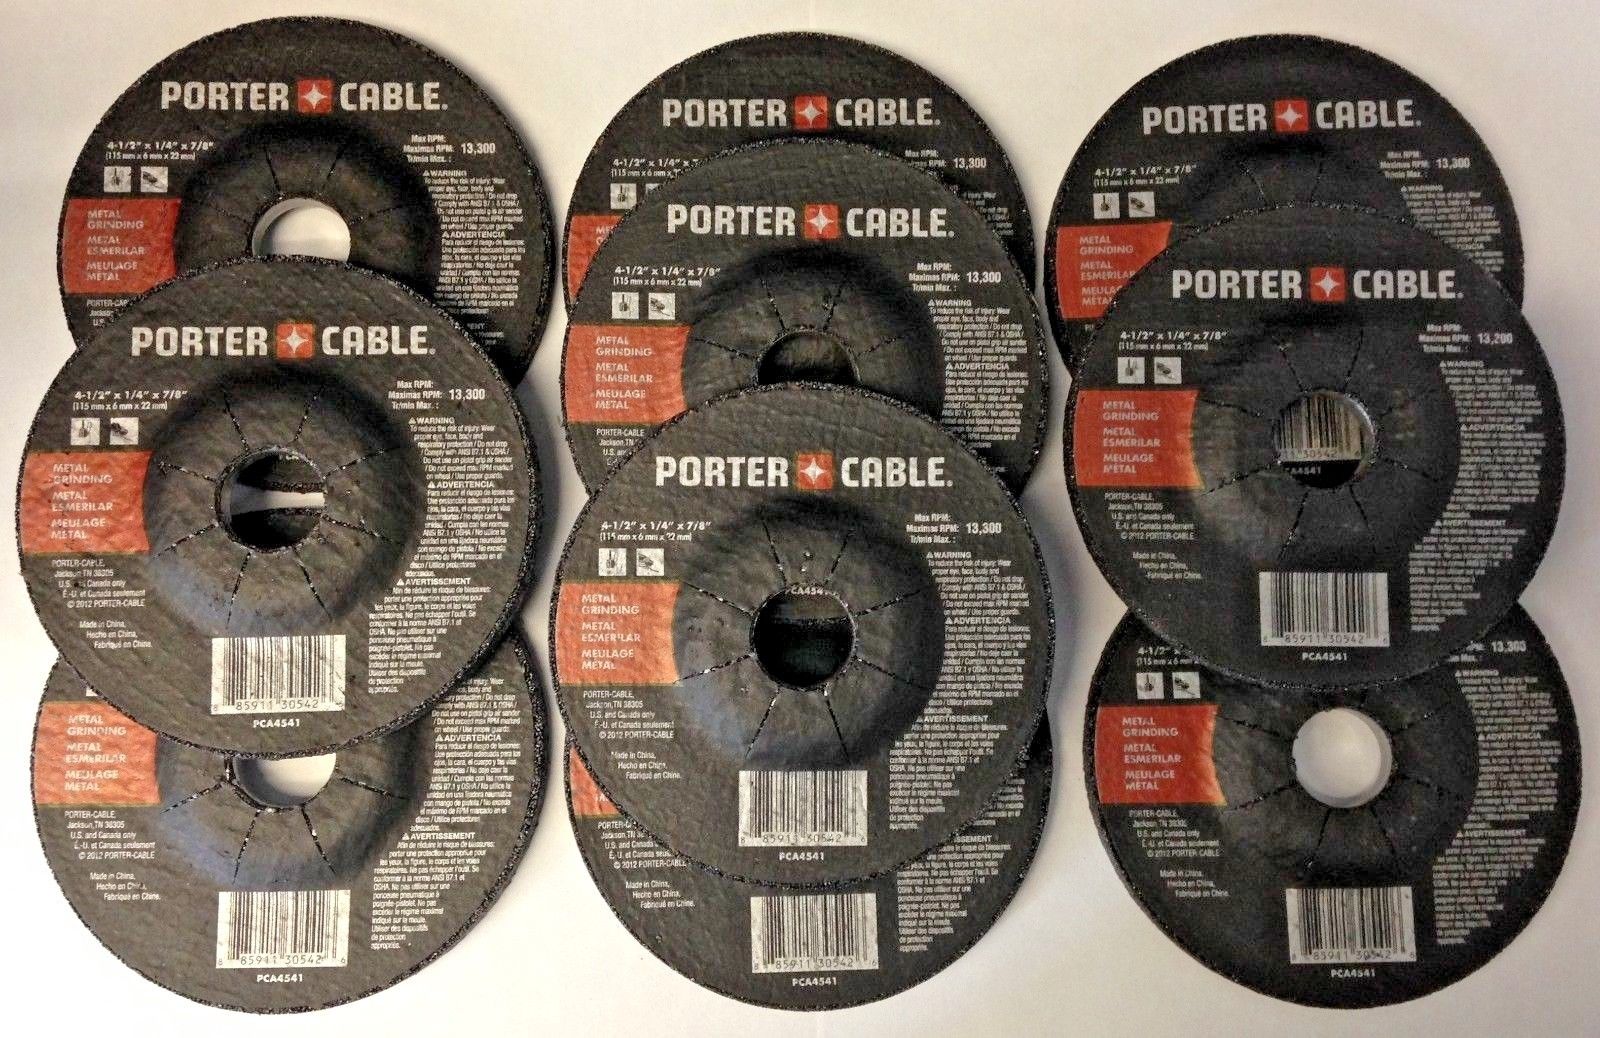 Porter Cable PCA4541 4-1/2" x 1/4" x 7/8" Metal Grinding Wheels 10 Pack